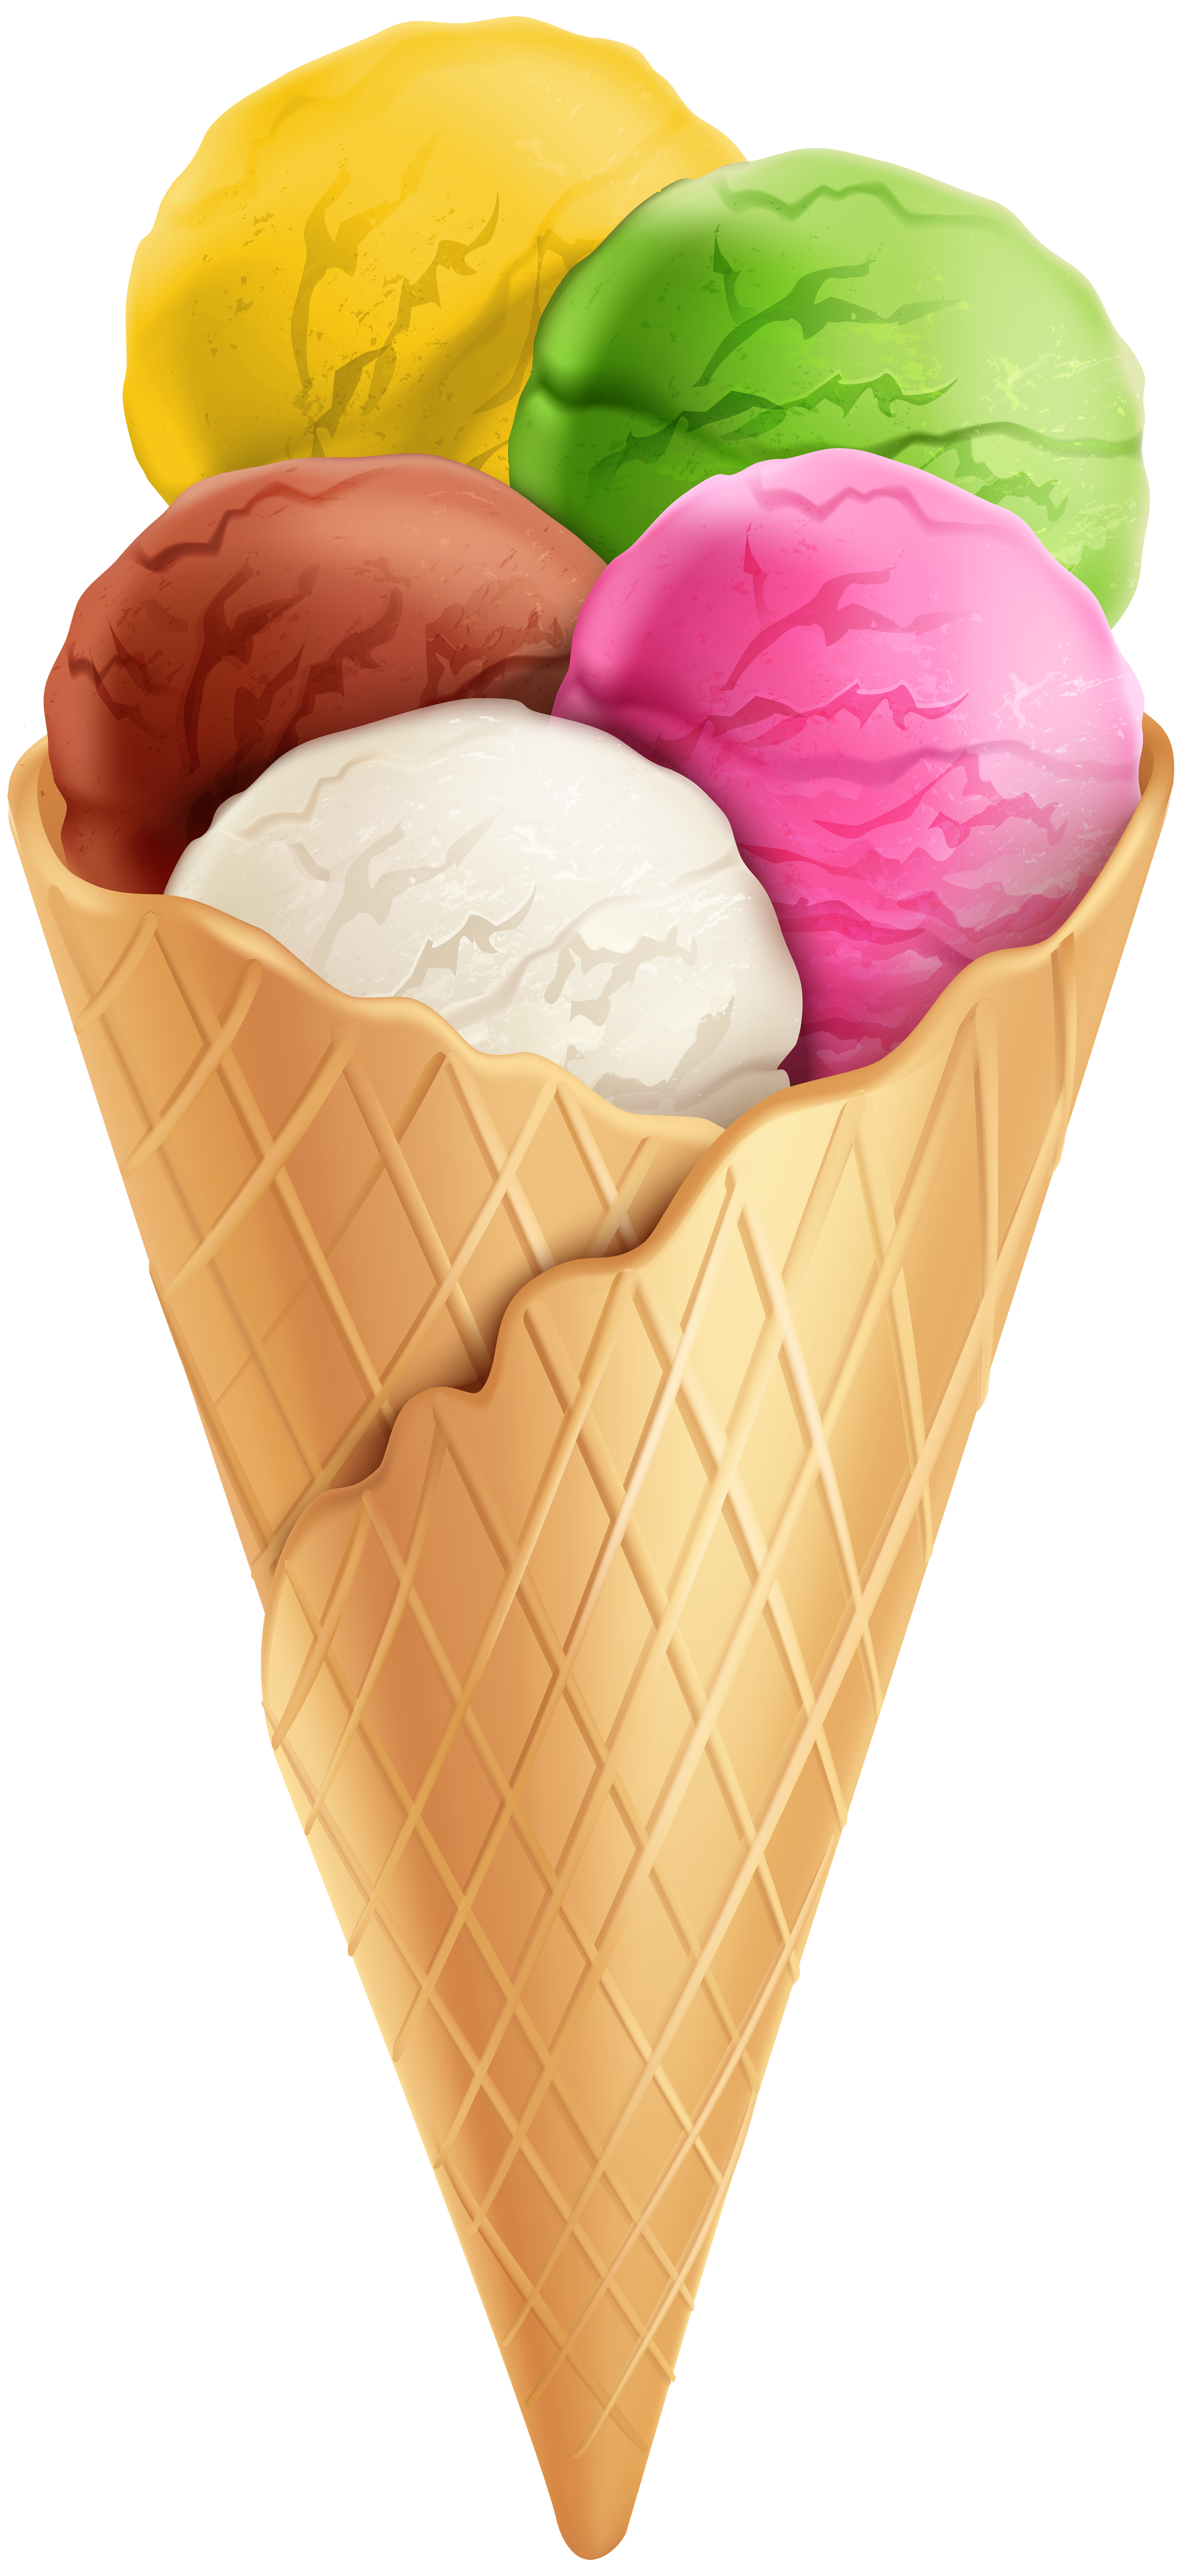 Cold clipart cold food. Ice cream transparent png